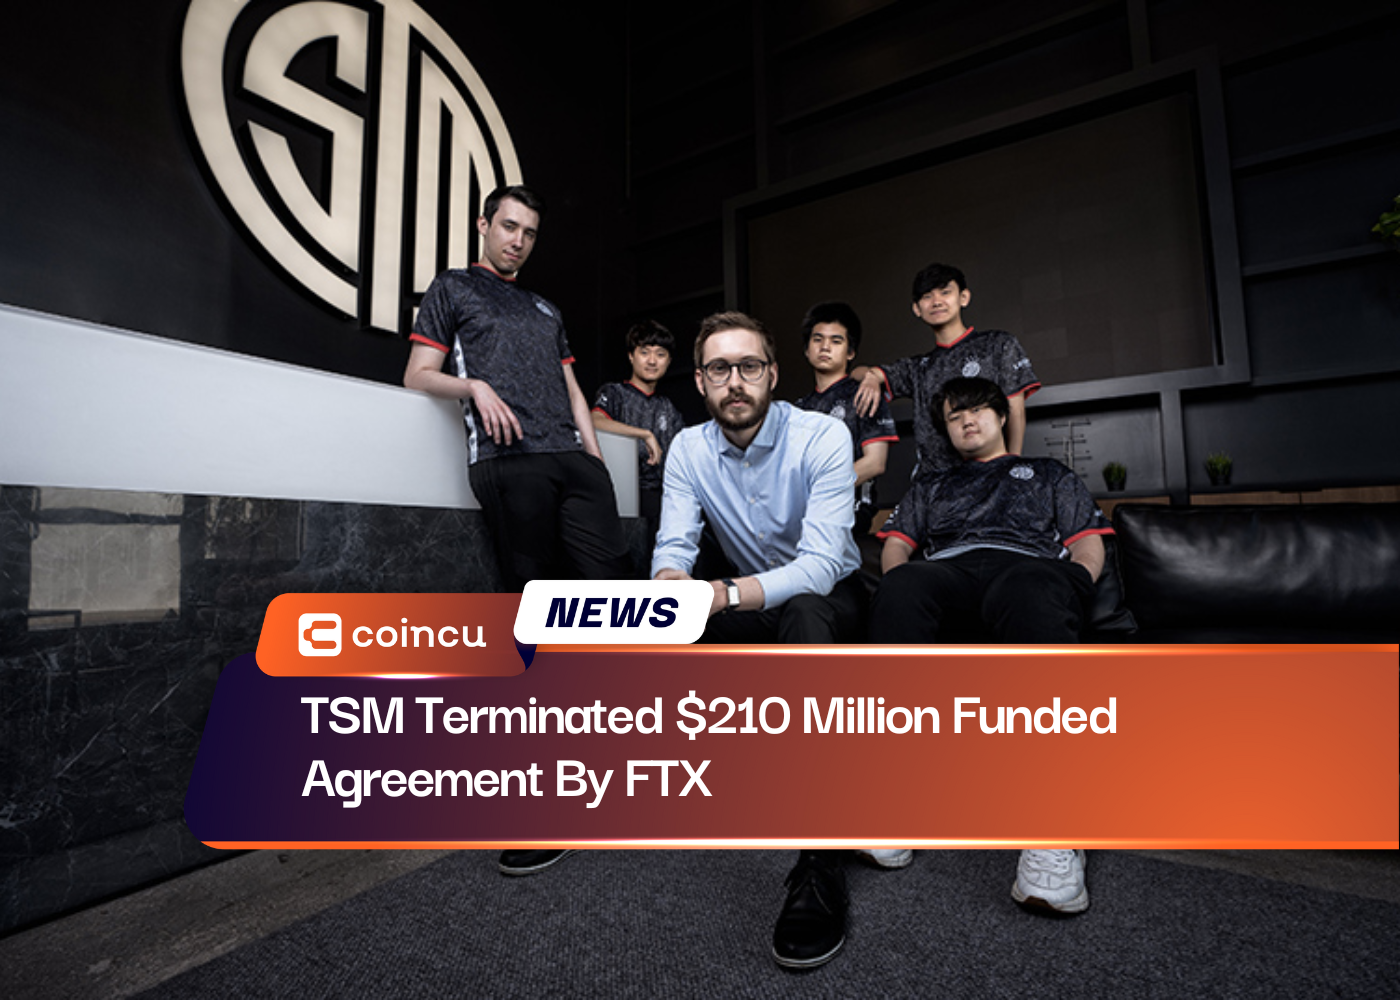 TSM Terminated $210 Million Funded Agreement By FTX